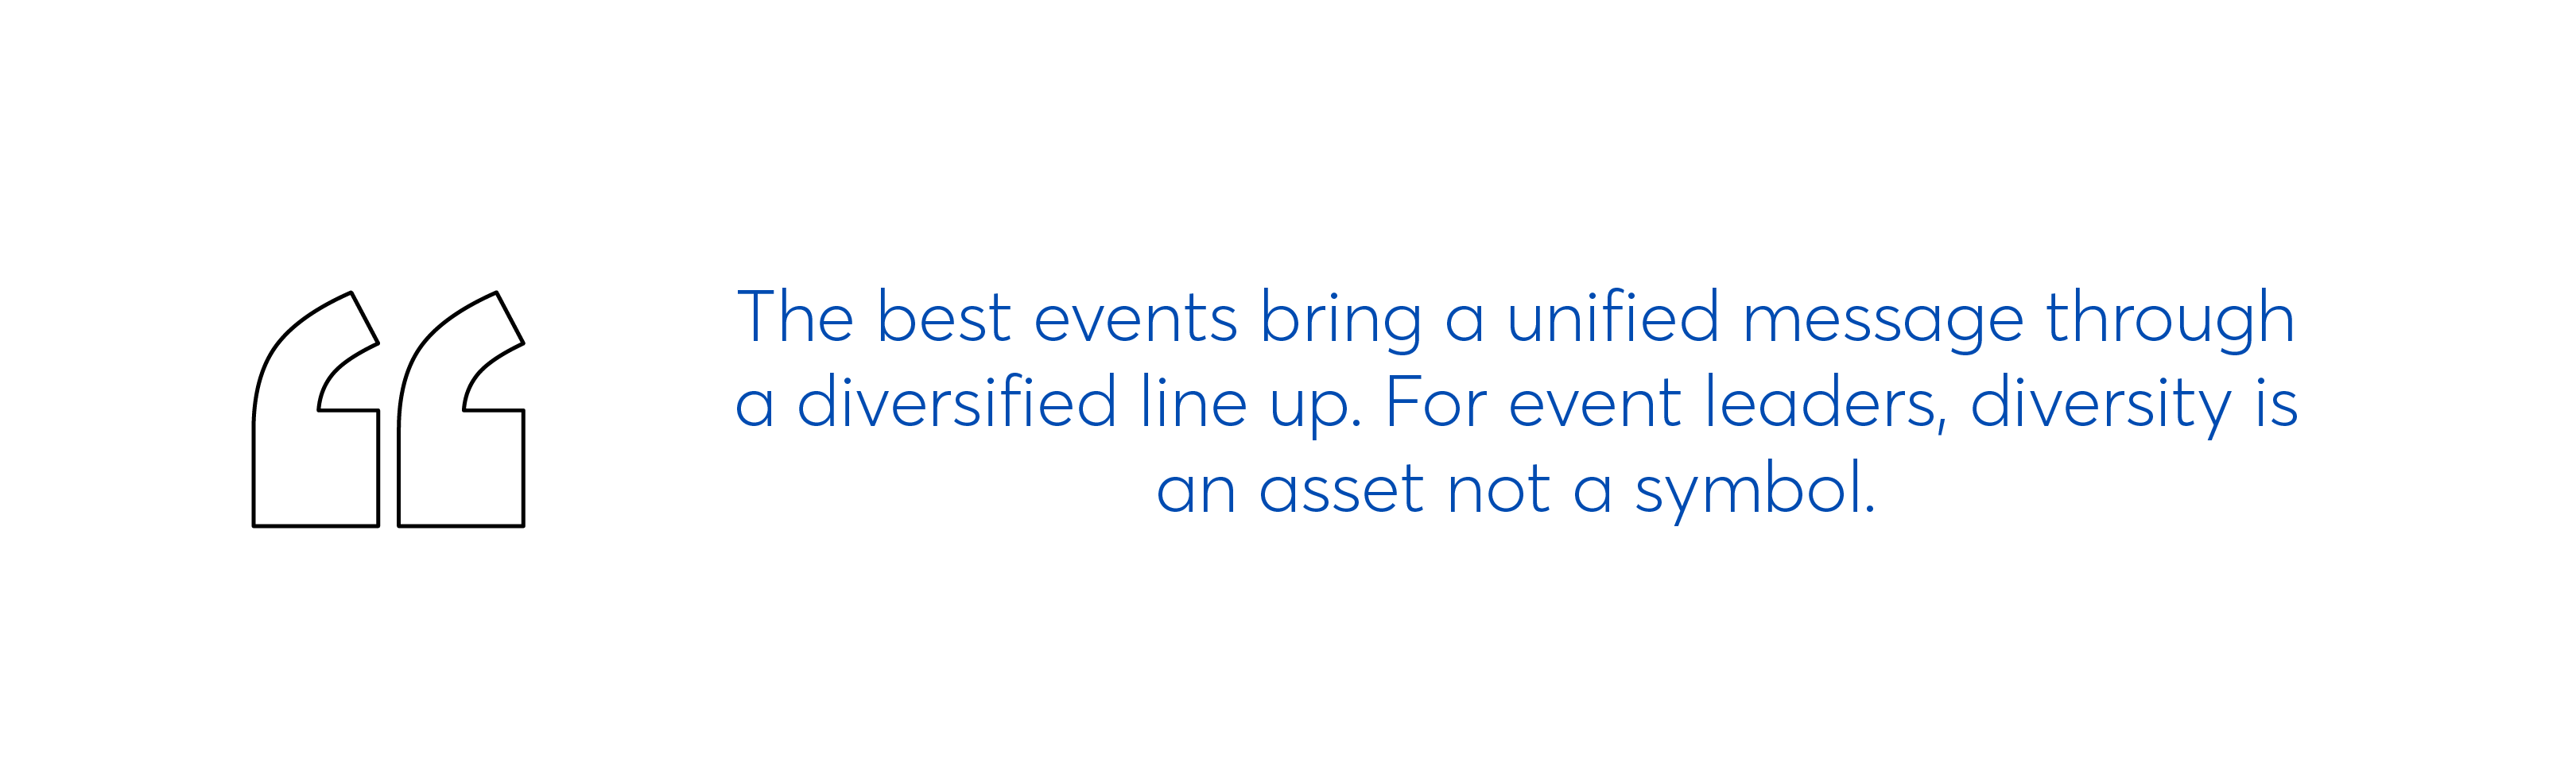 Best events bring unified messages